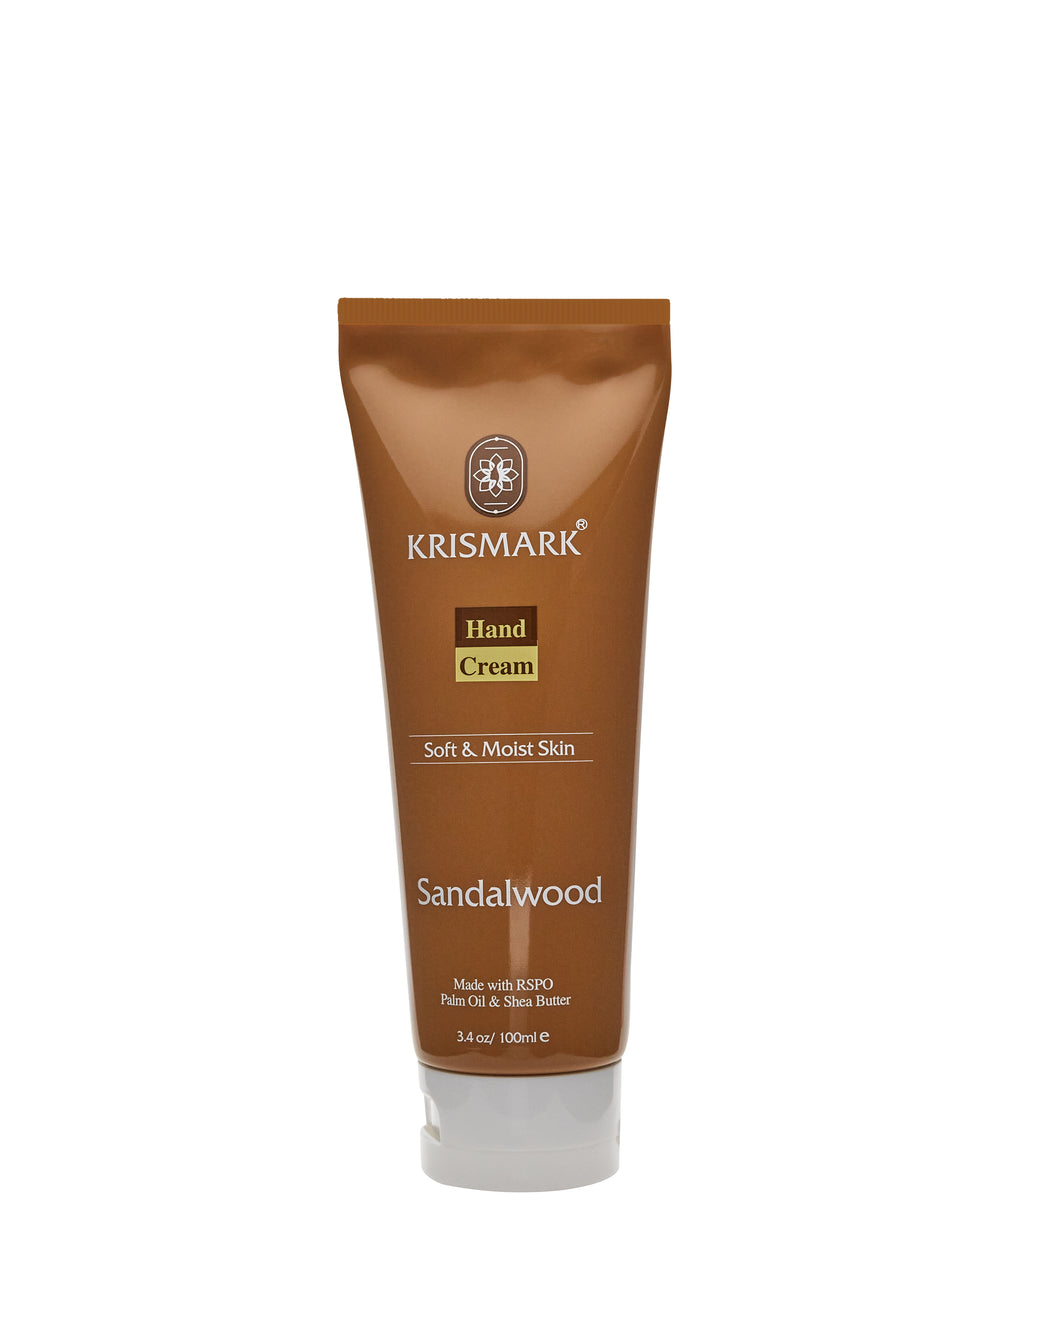 Krismark Hand Cream With Palm Oil and Shea Butter - Sandalwood